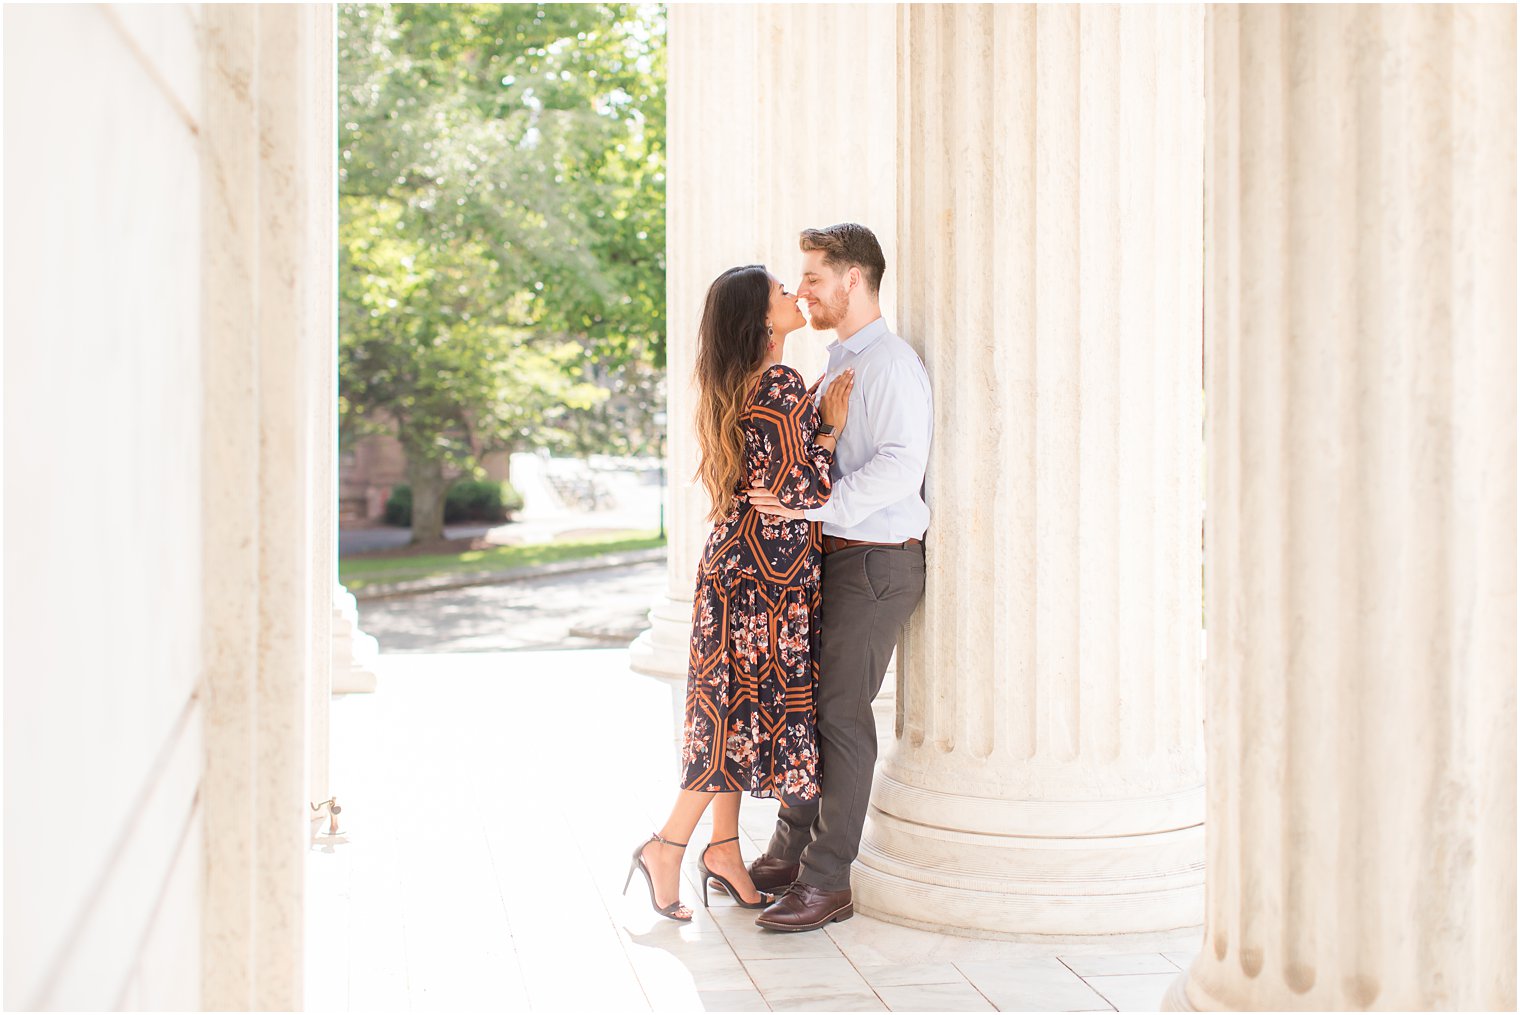 Princeton University Engagement Session in the summer